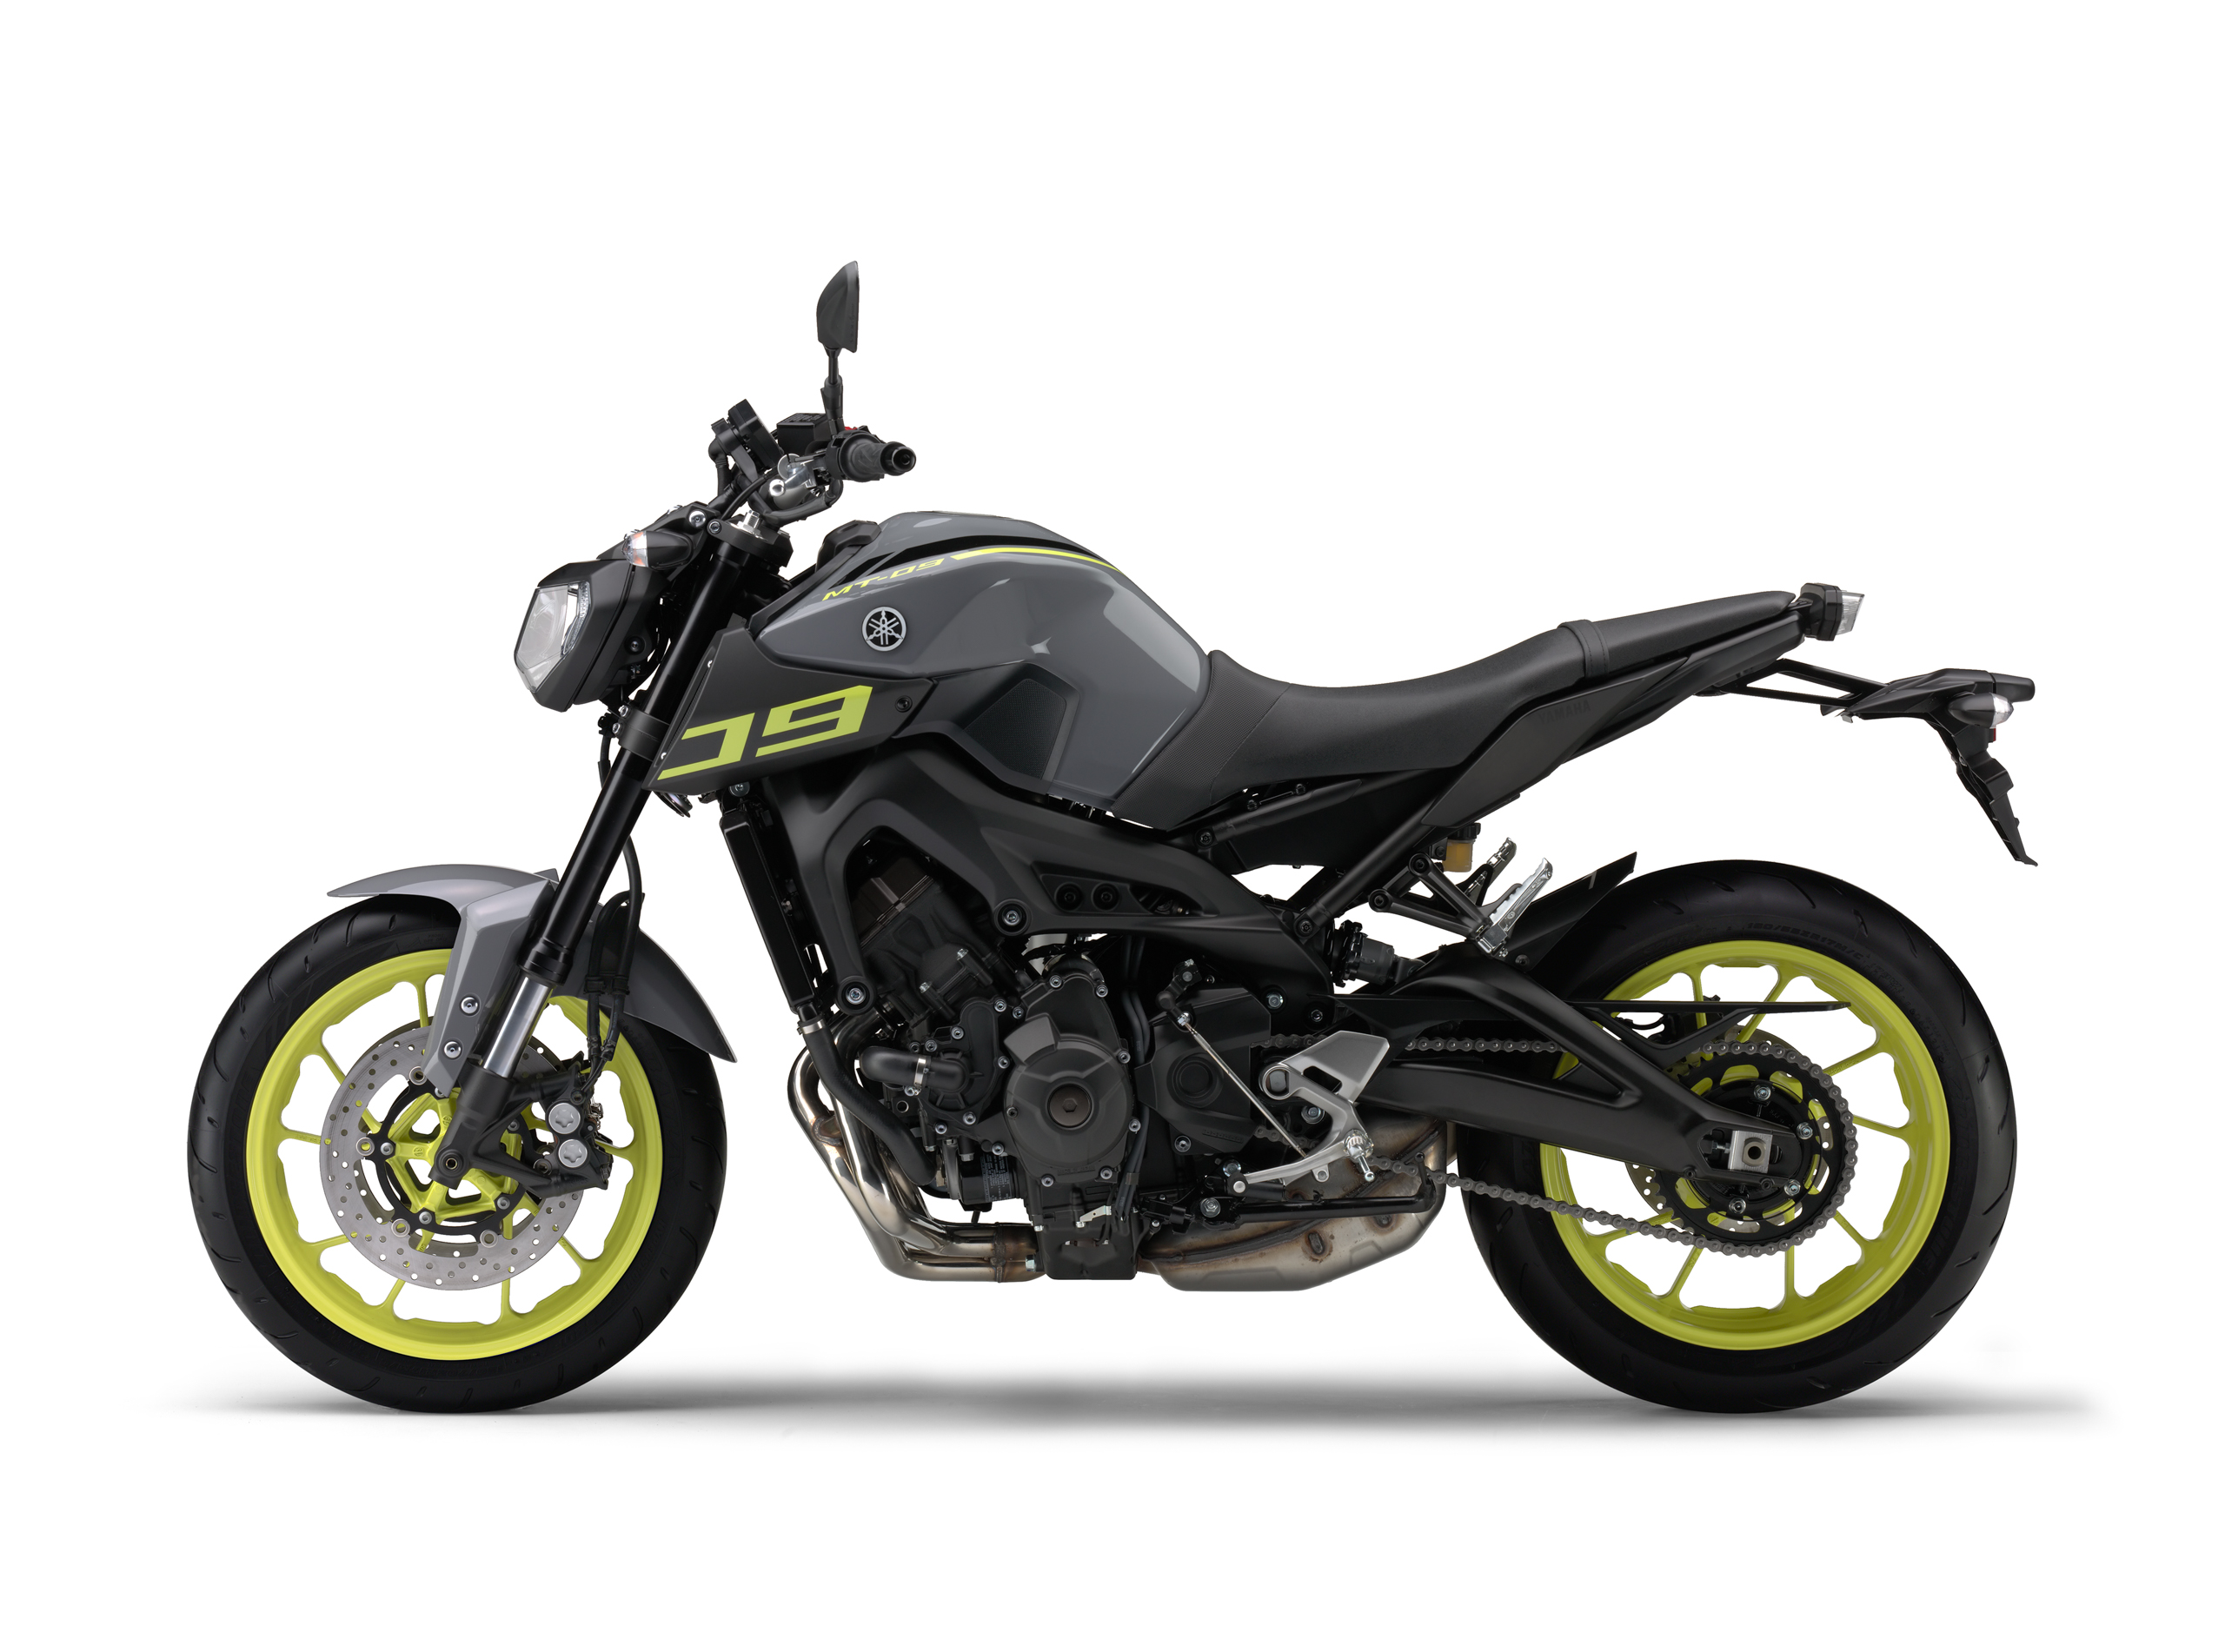 2016 Yamaha MT-09 in Malaysia - new colours, RM45k Image 448732